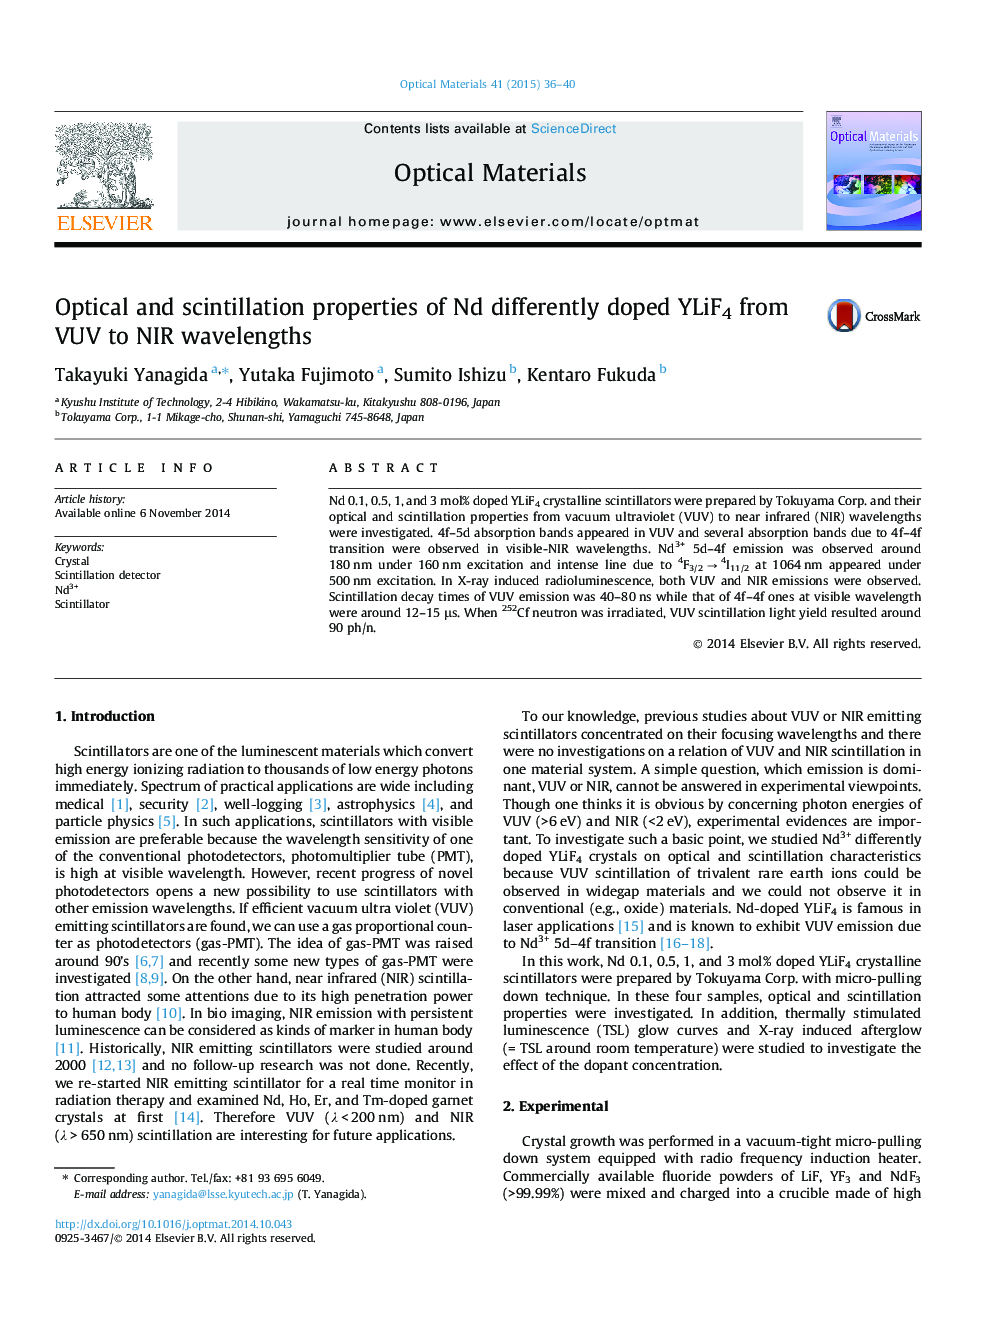 Optical and scintillation properties of Nd differently doped YLiF4 from VUV to NIR wavelengths